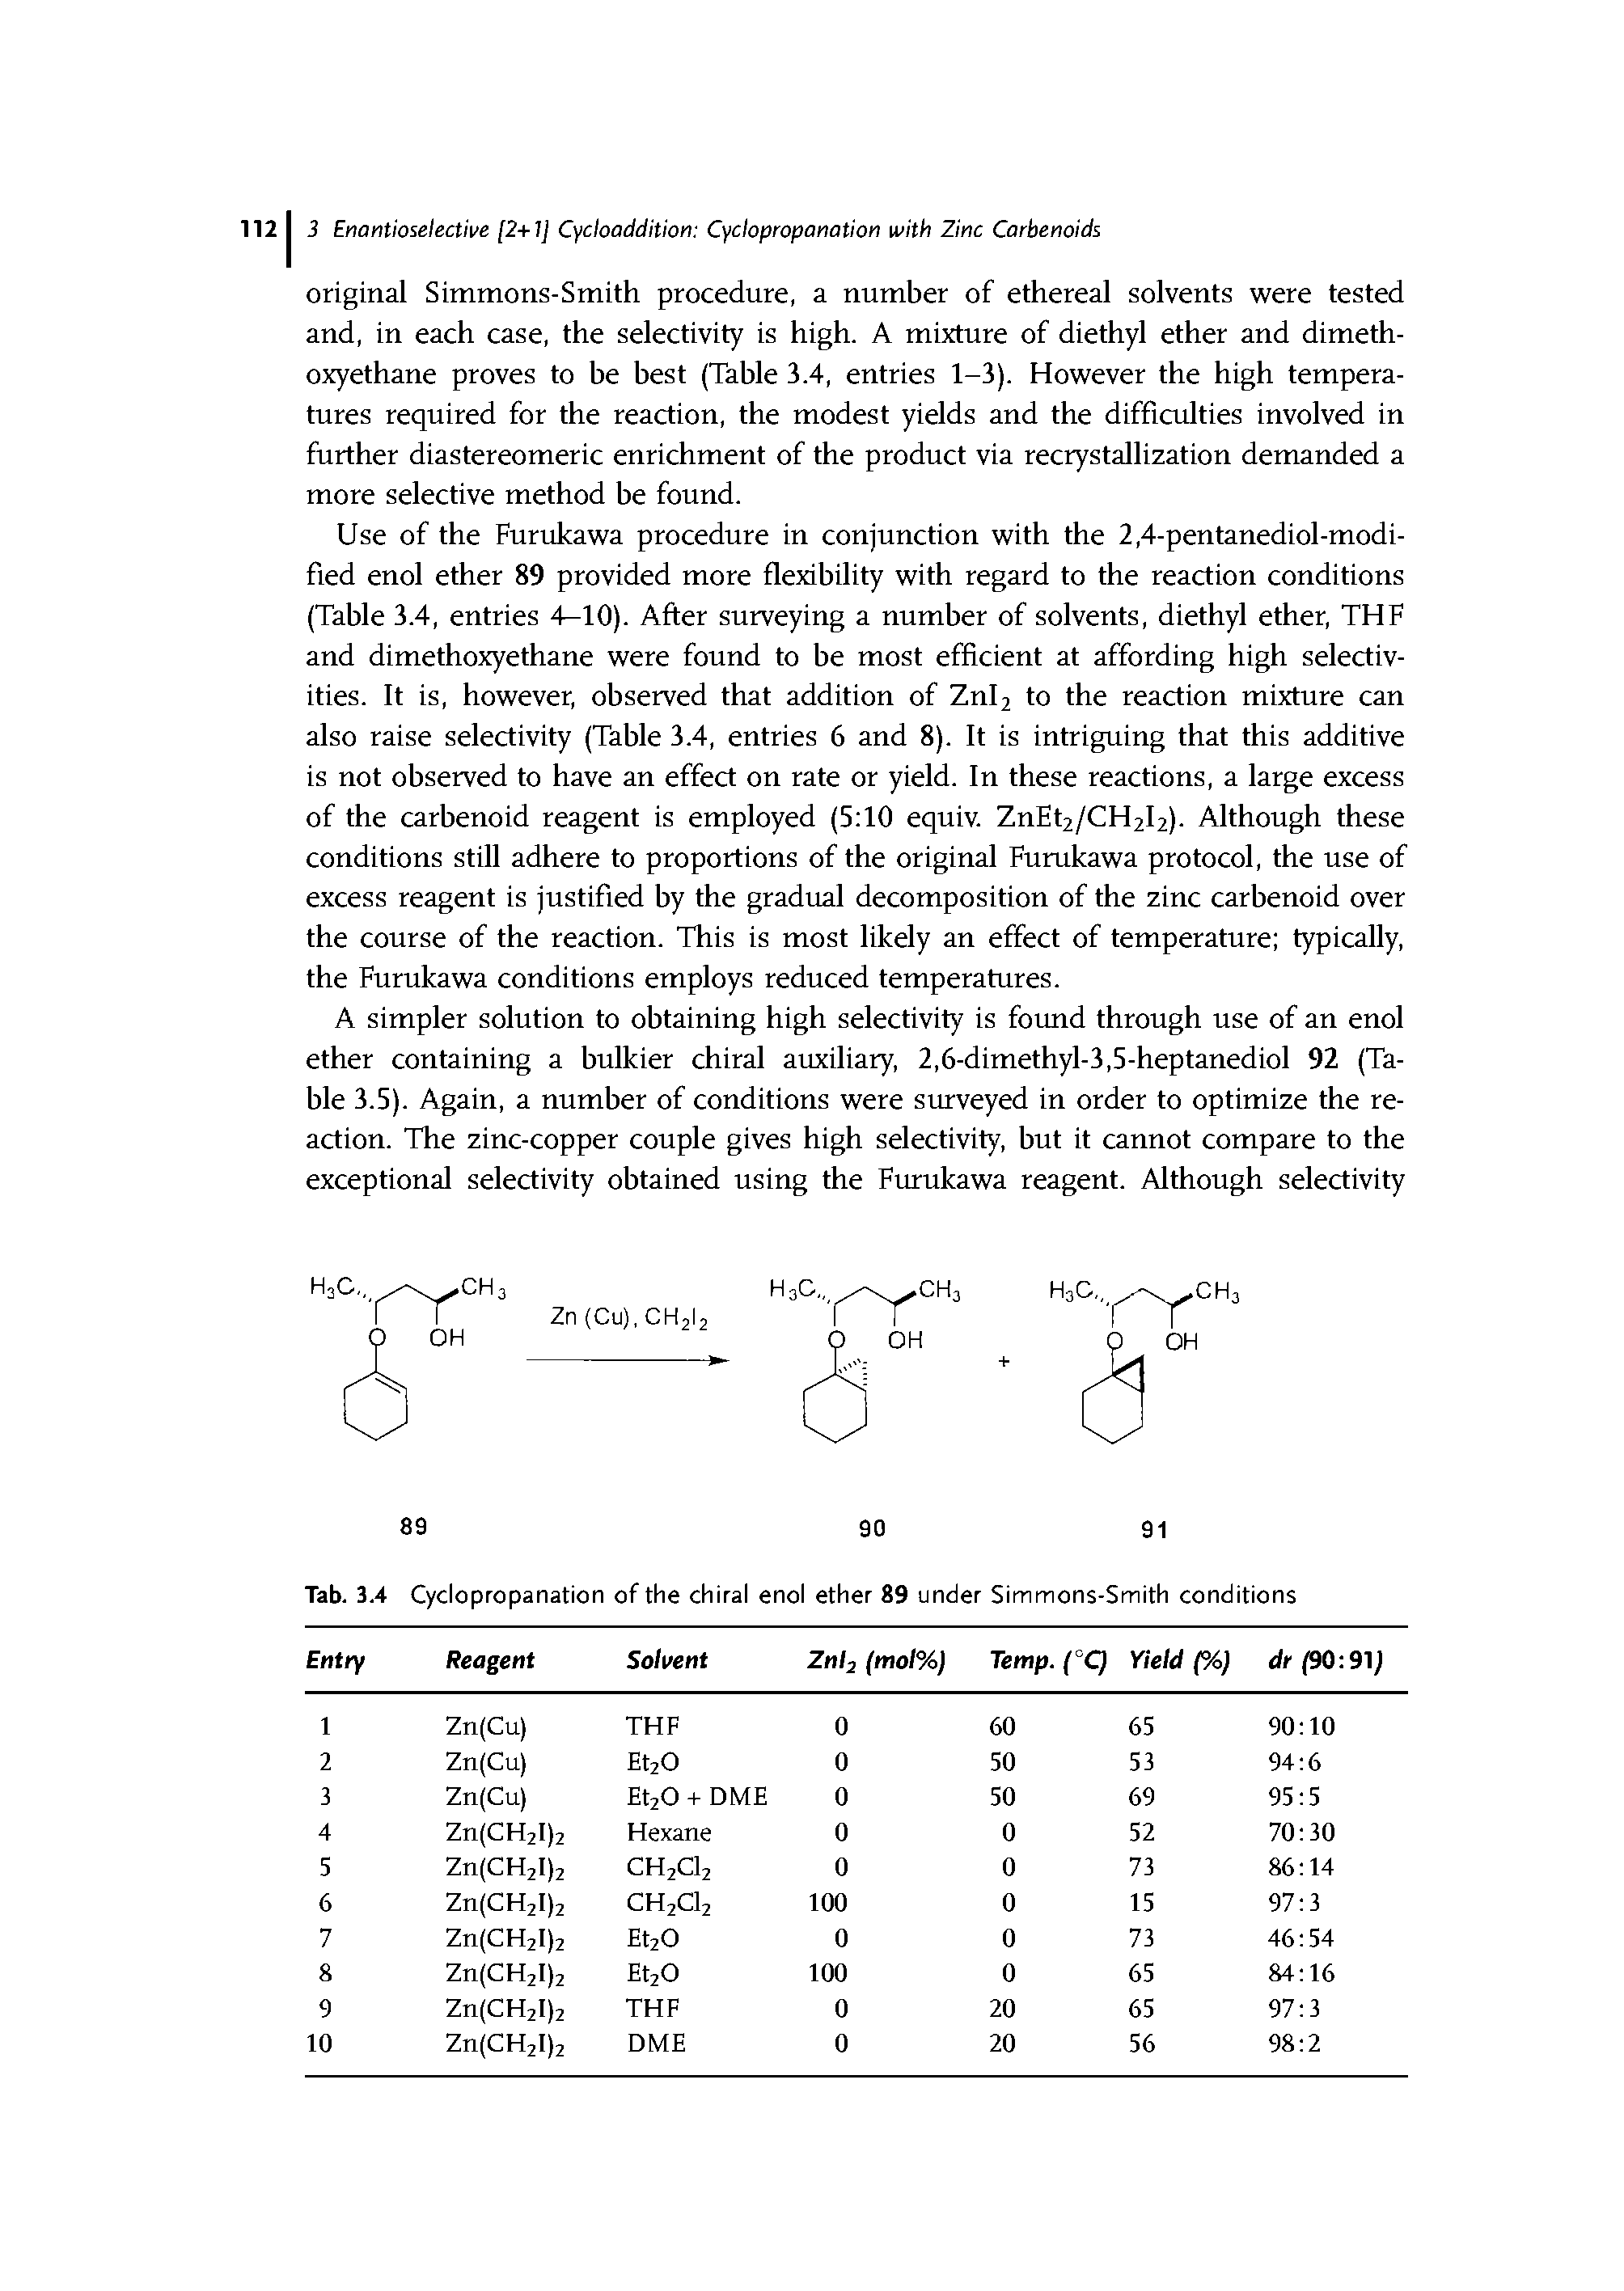 Tab. 3.4 Cyclopropanation of the chiral enol ether 89 under Simmons-Smith conditions...